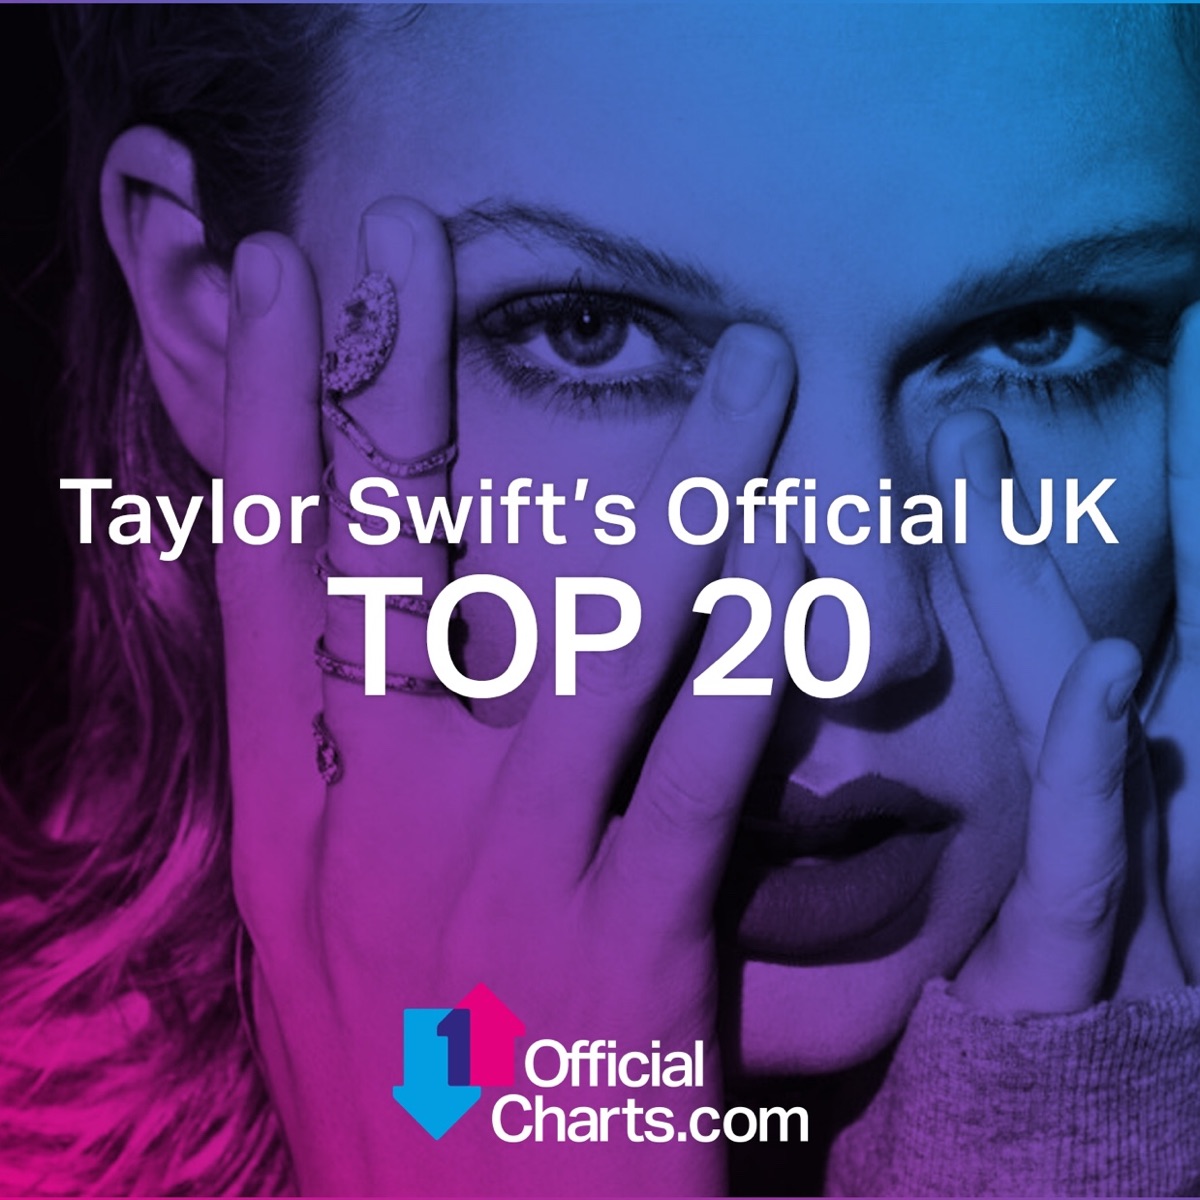 Top 20 Official Chart